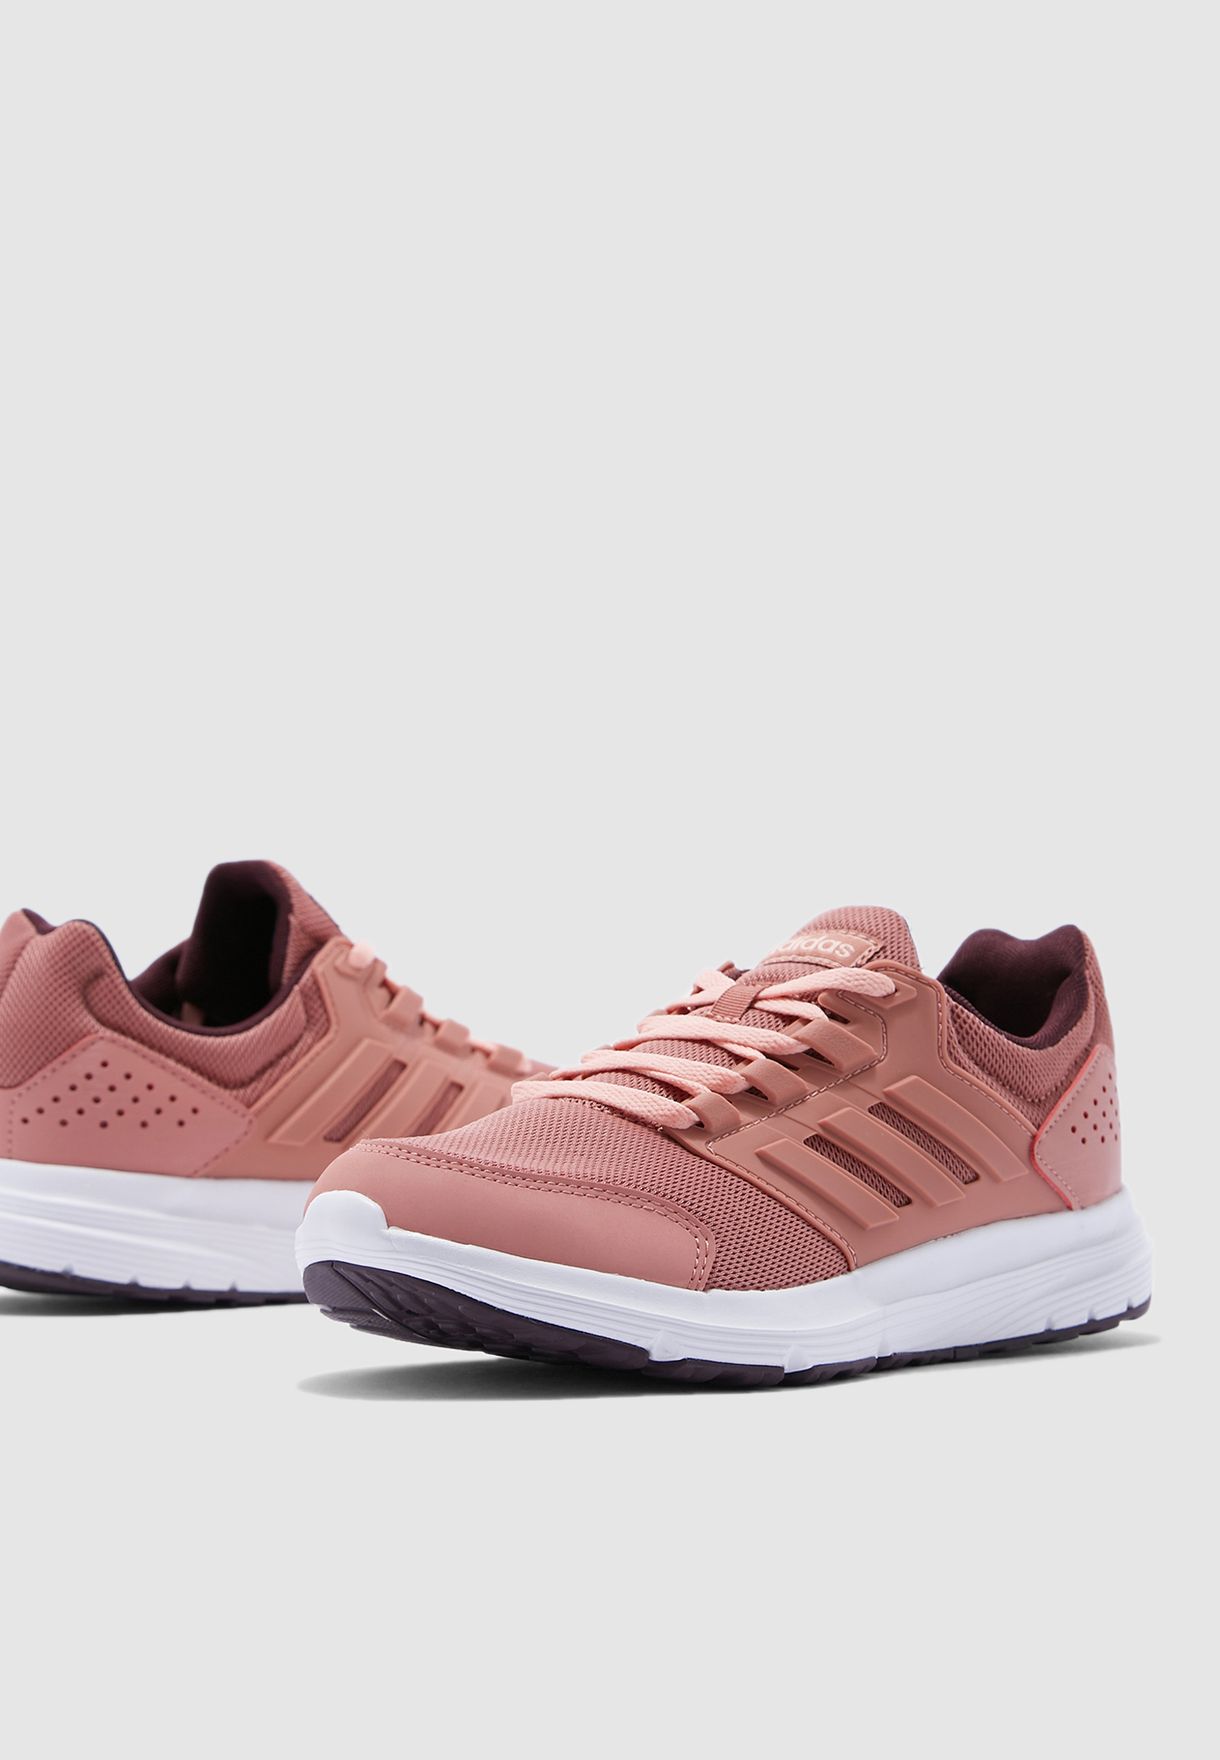 adidas dusty pink shoes